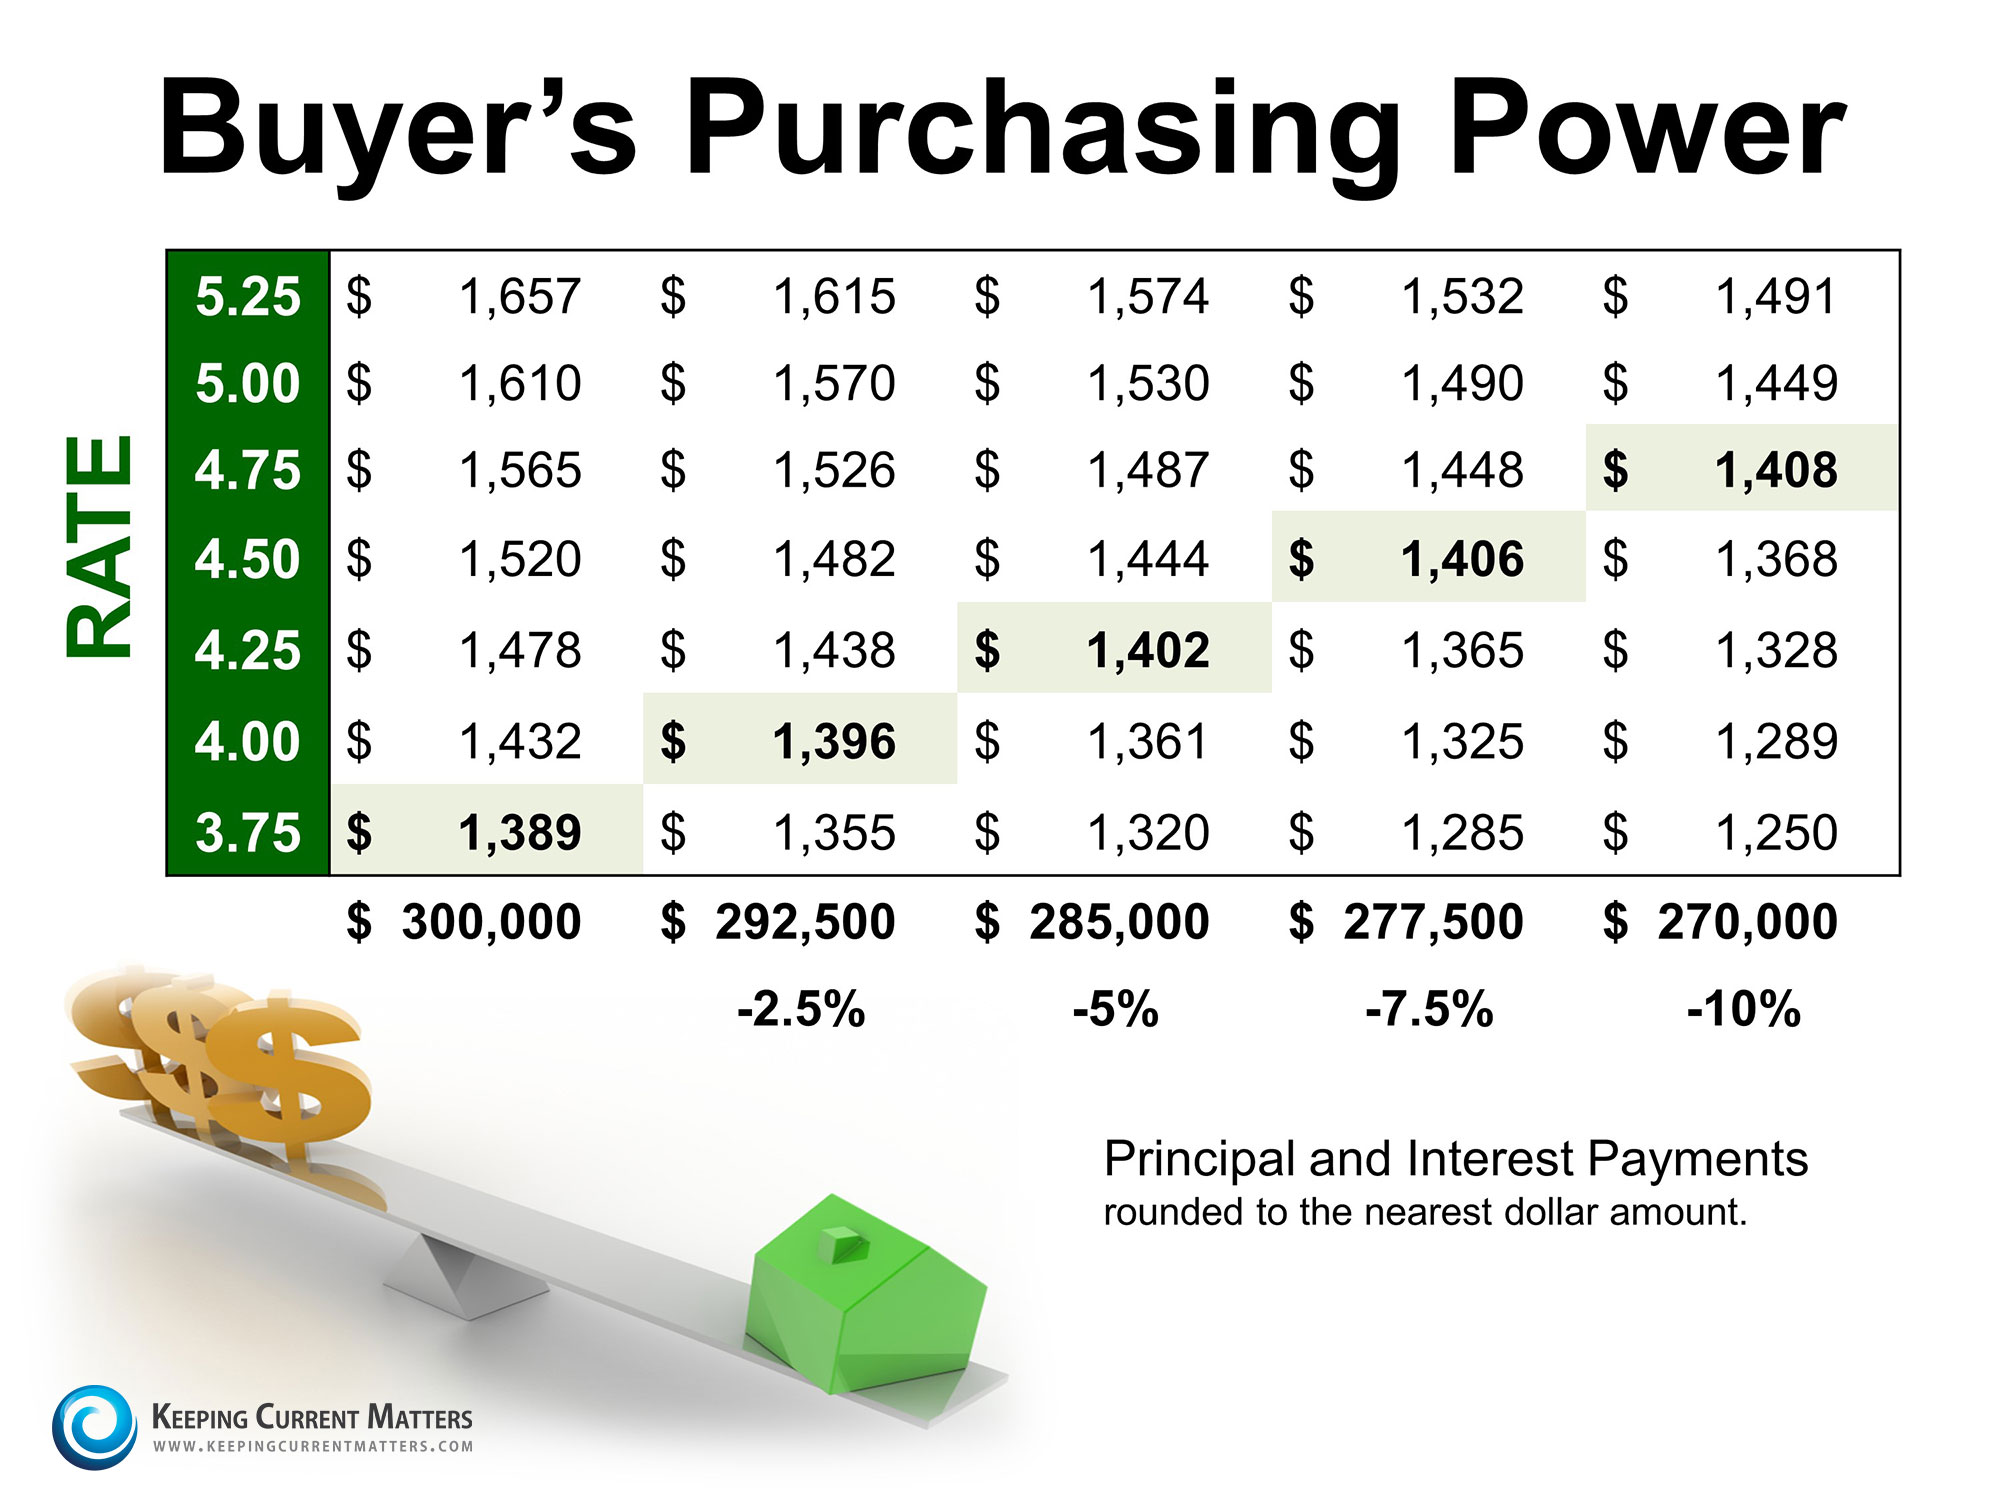 Buyers Purchasing Power | Keeping Current Matters